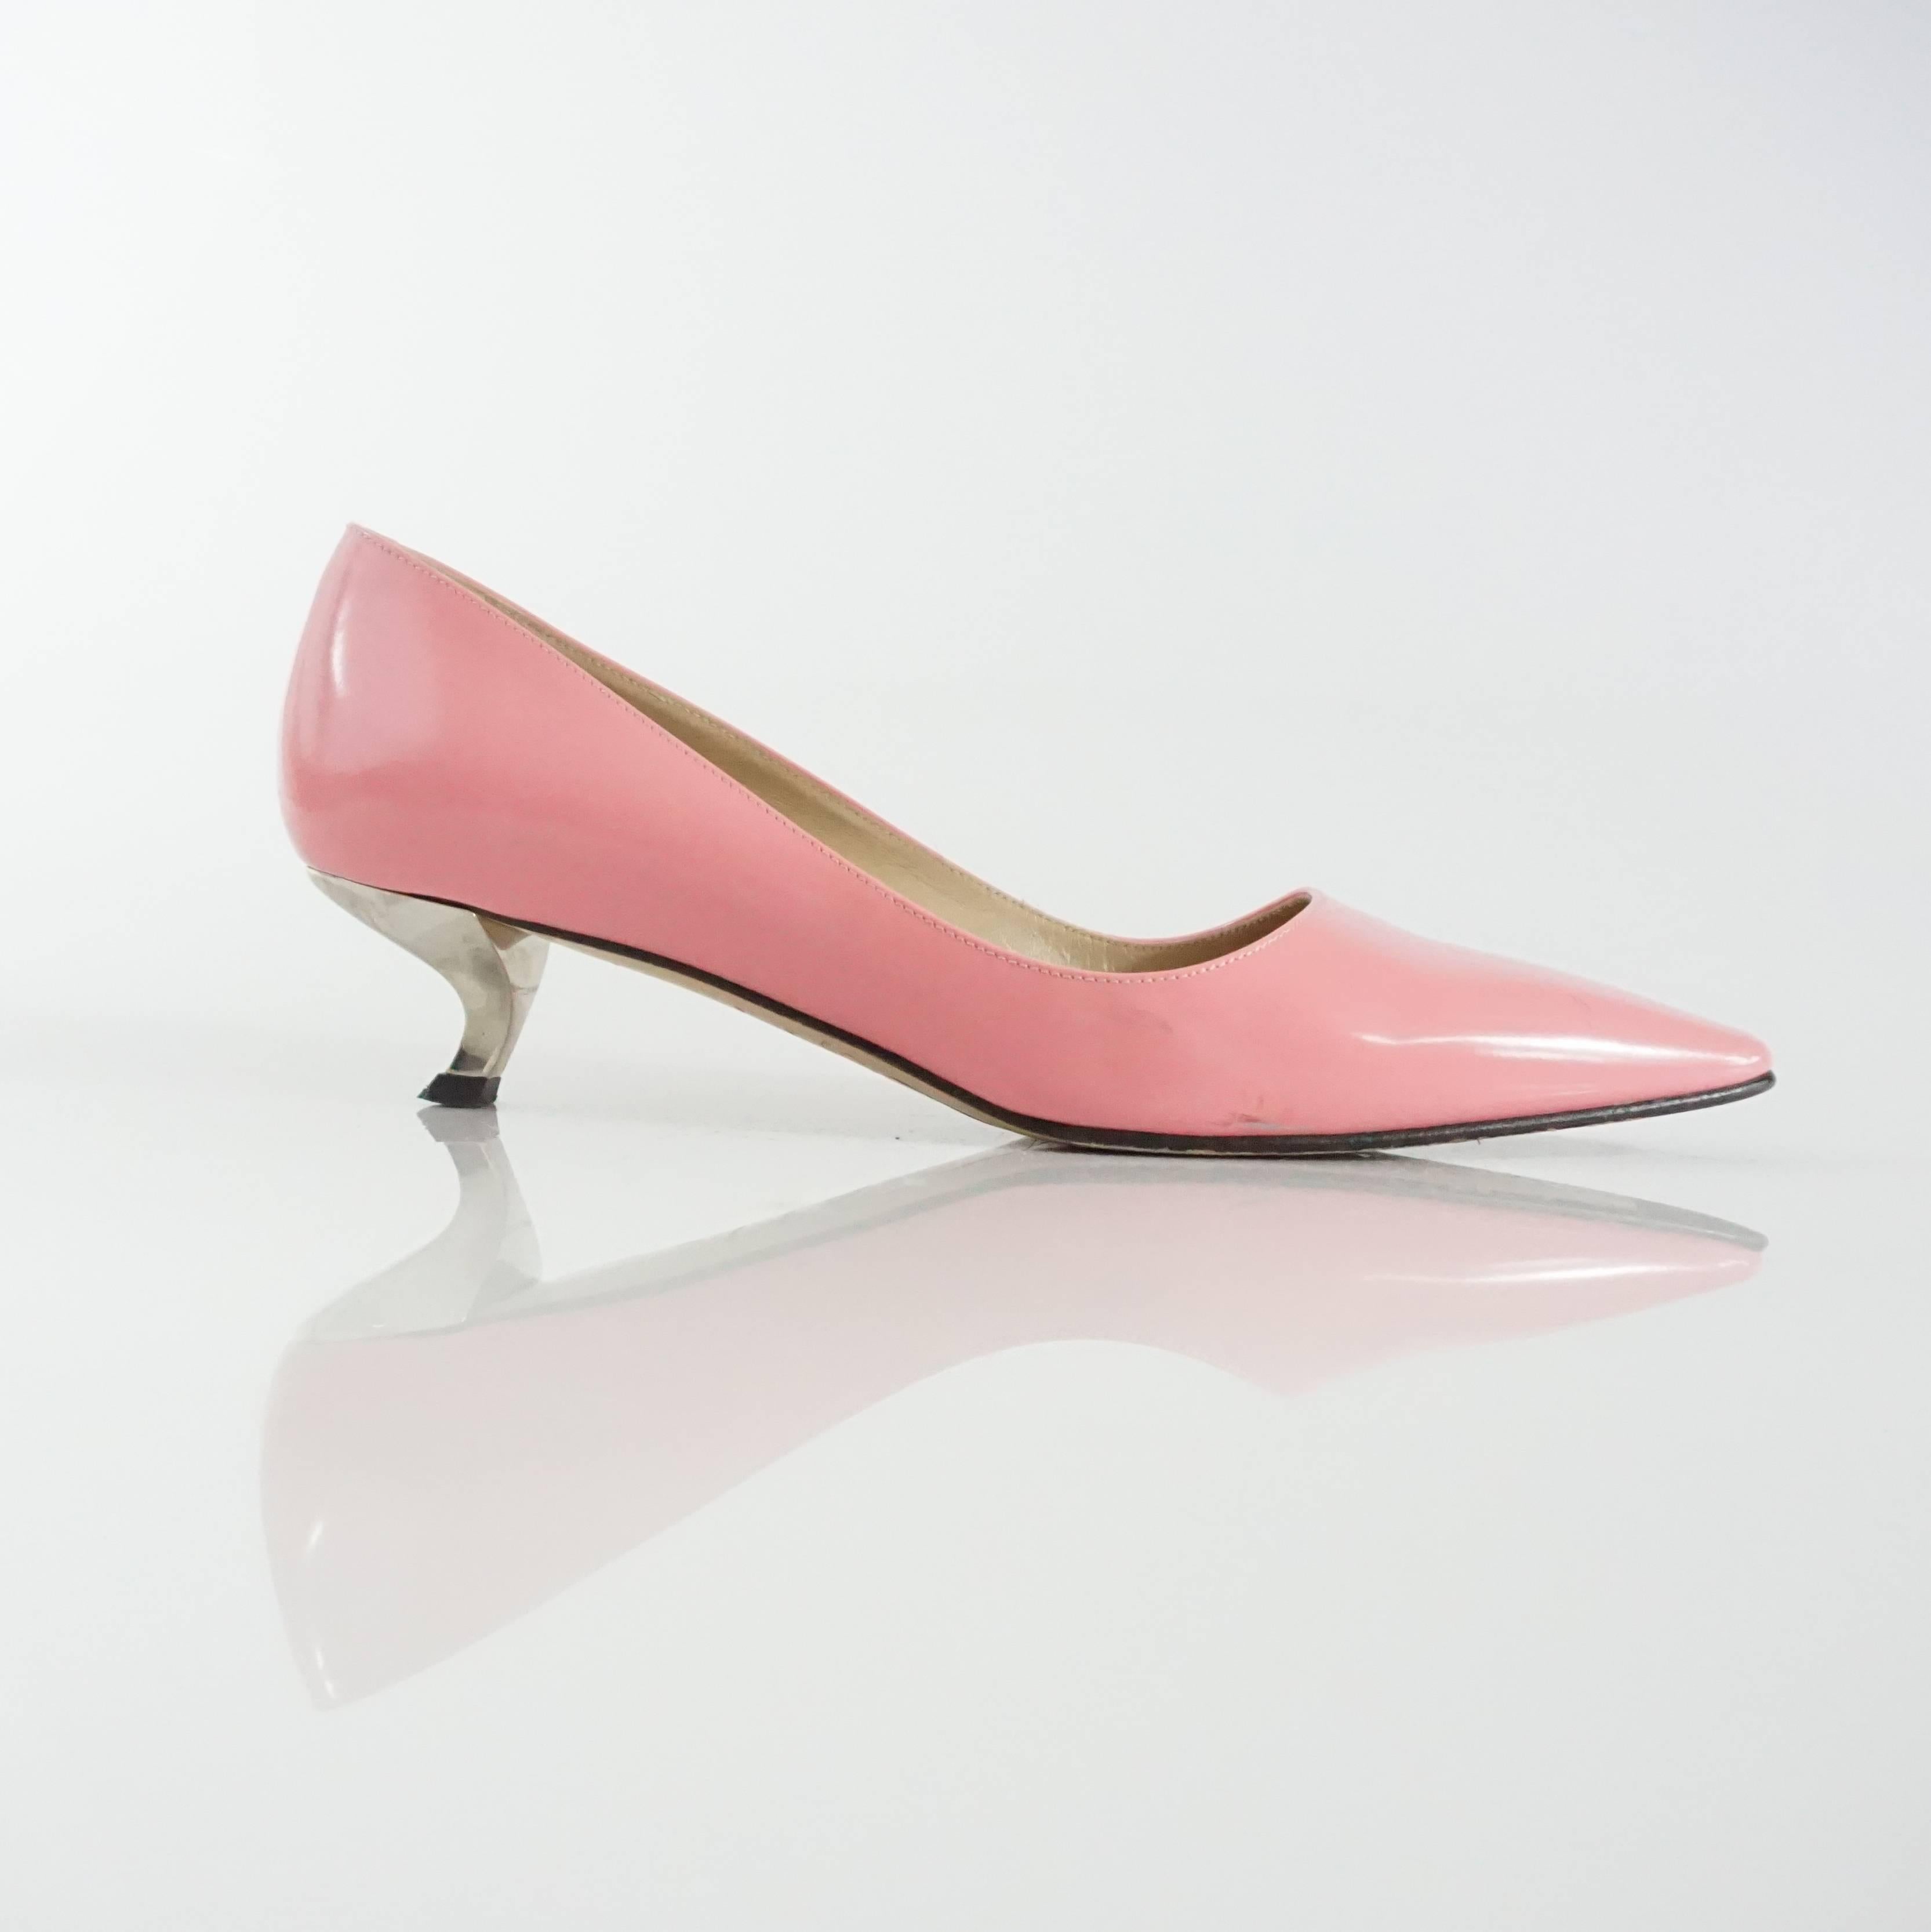 These Roger Vivier pink leather flats have a small silver heel. They feature a tapered toe. These shoes are in fair condition with many marks.

Heel Height: 1.63"